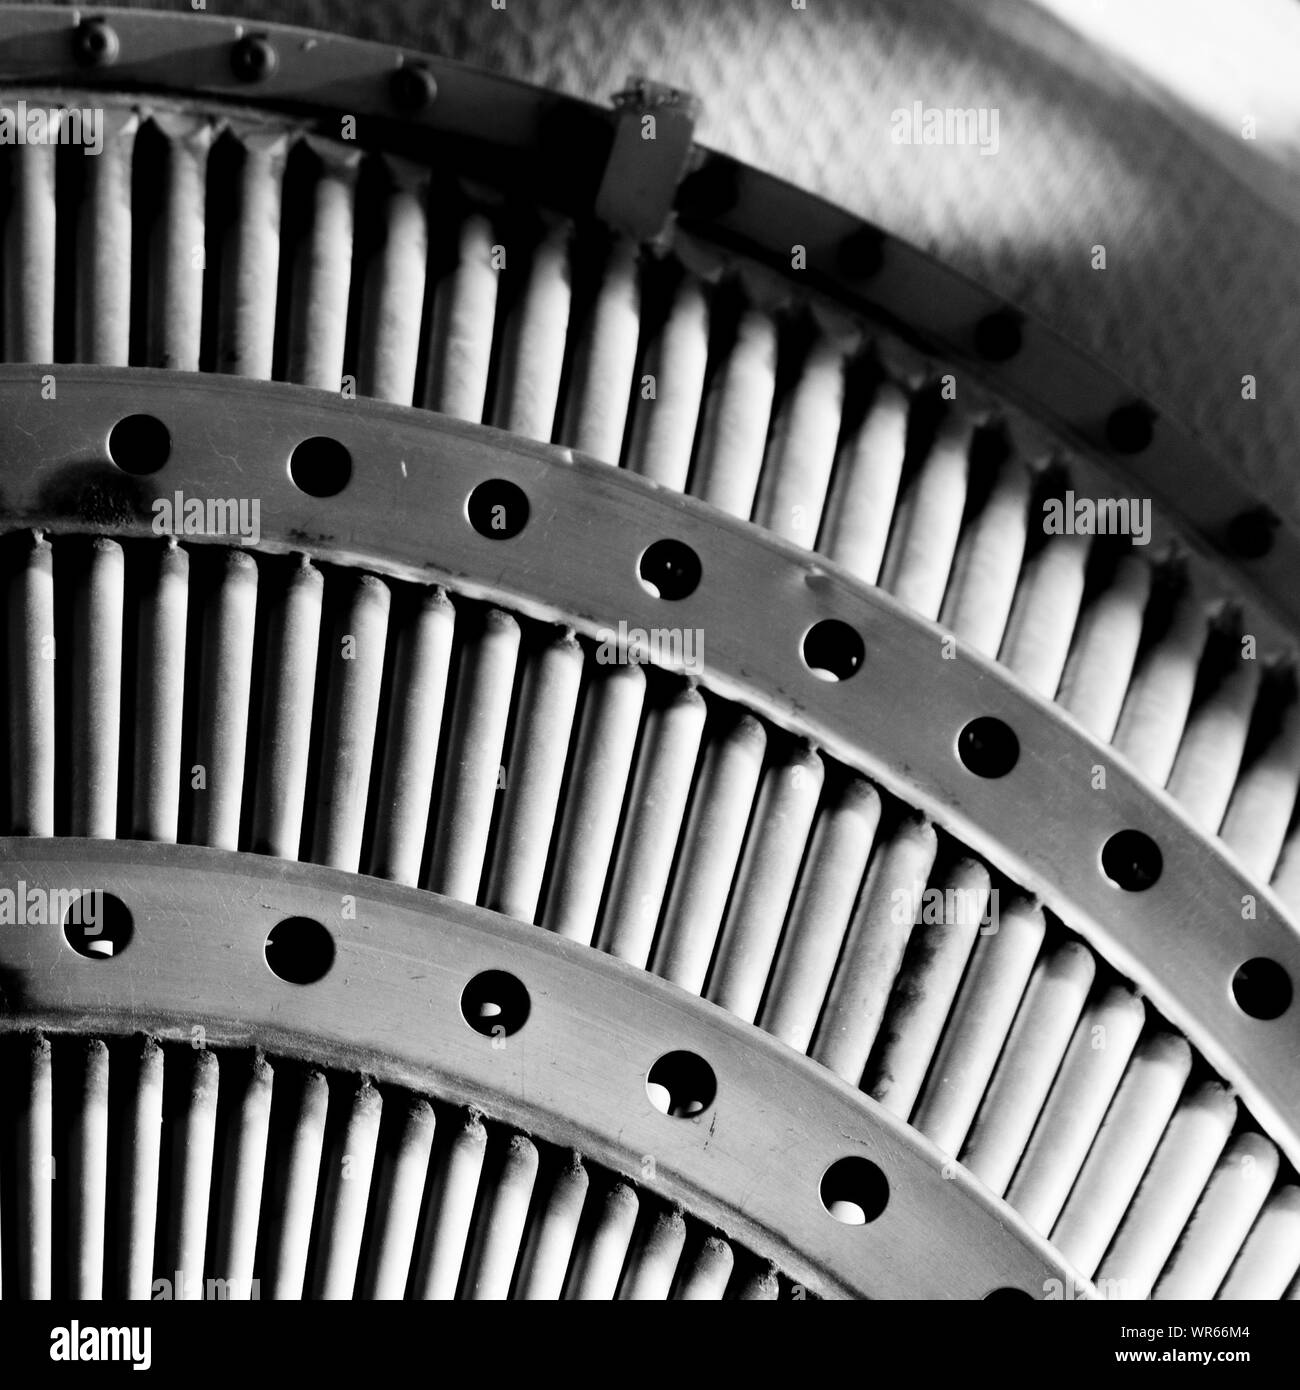 Repetitive Pattern Design Of Metal Equipment Stock Photo